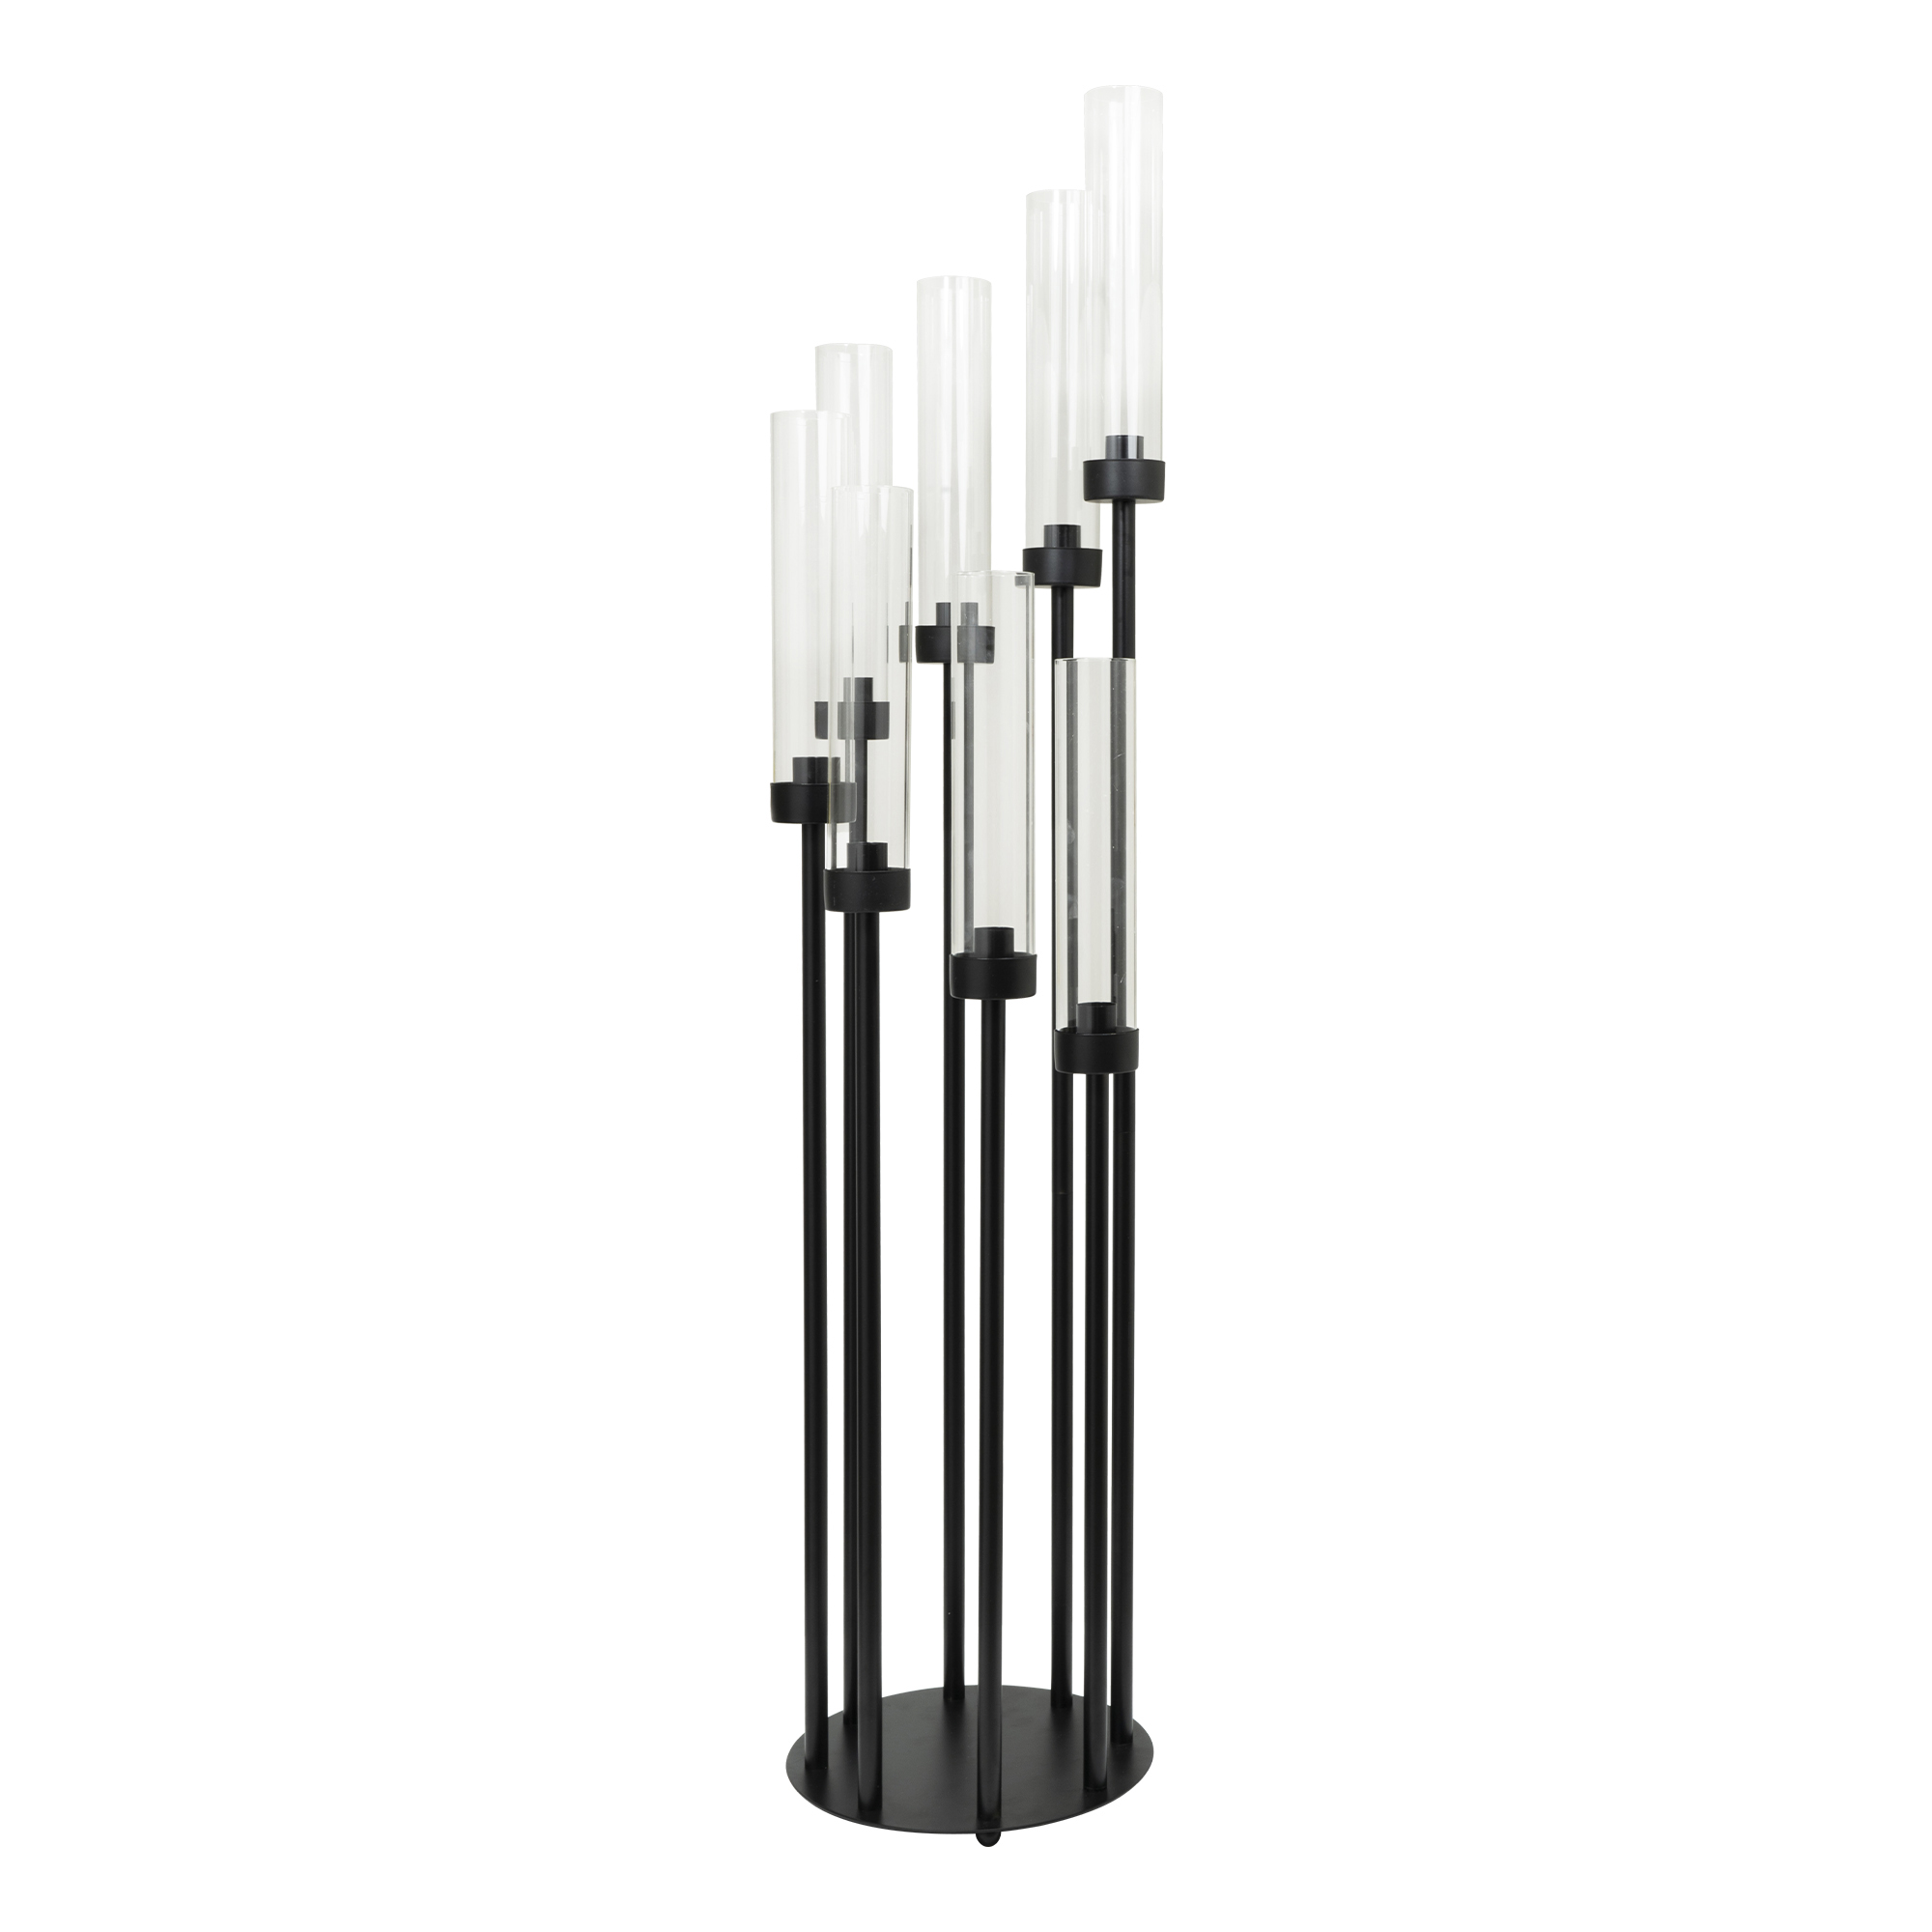 Round Eight Arm Cluster Candle Holder 42"- Black